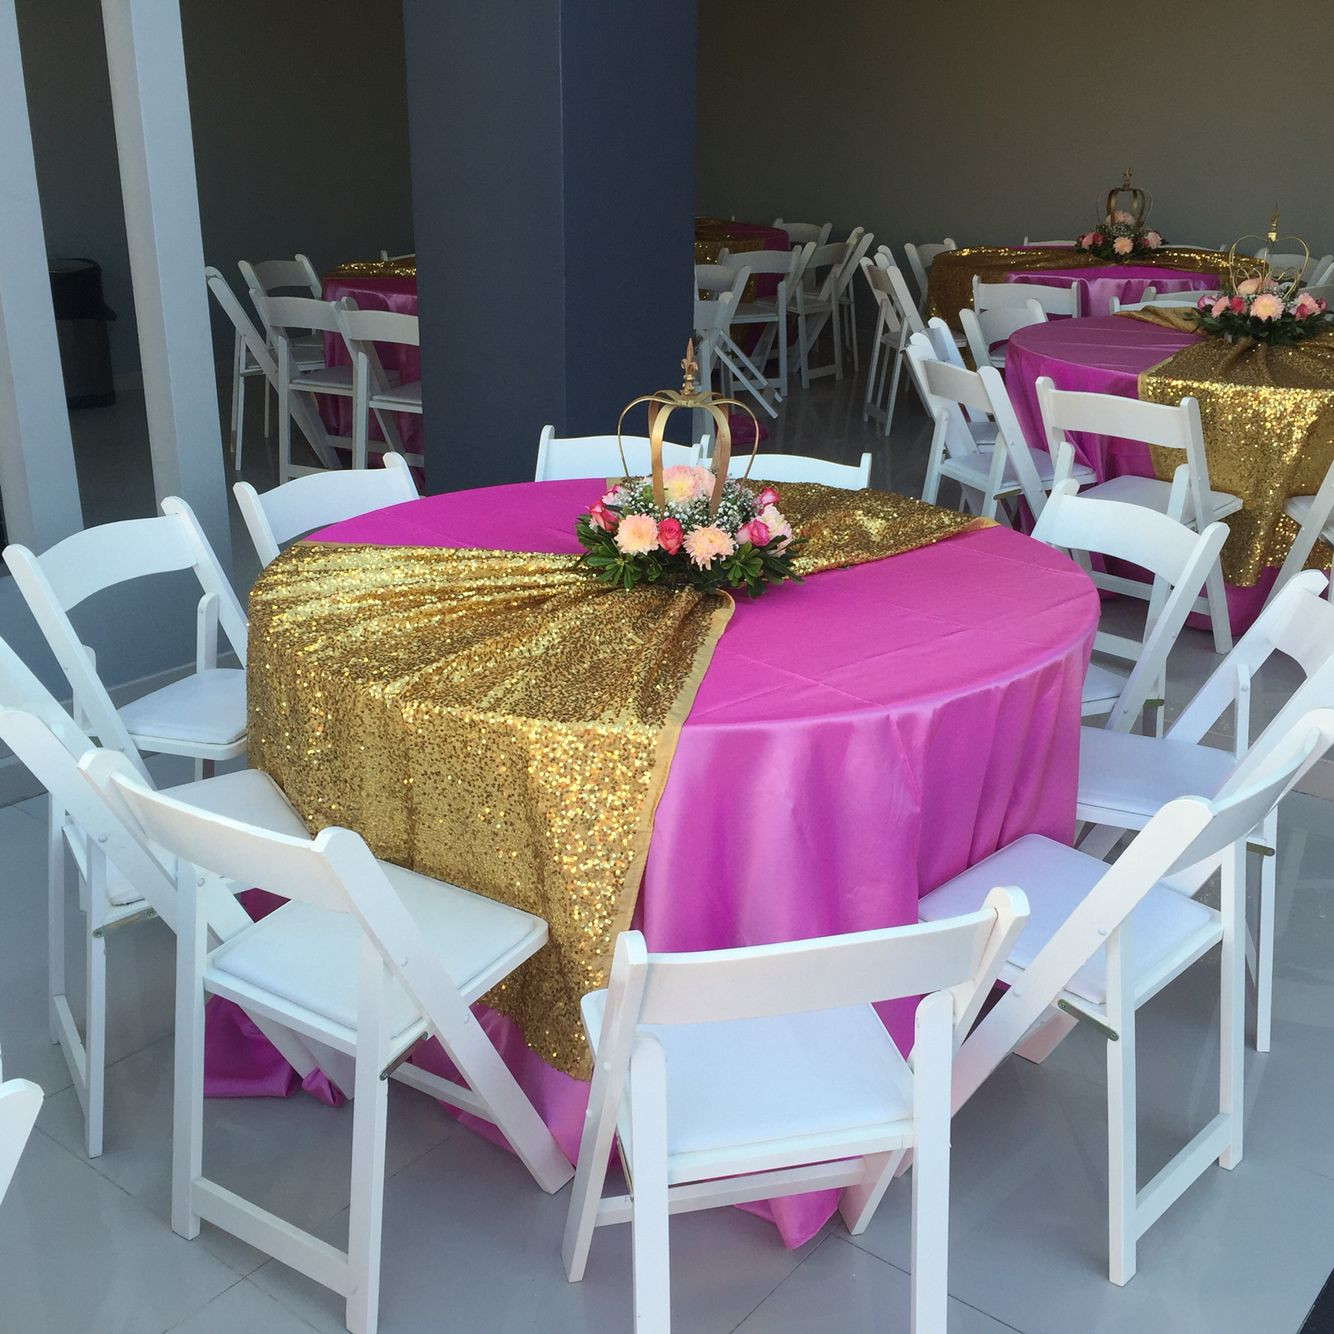 Backyard Graduation Party Ideas Pink And Black Gold Table Set Up
 Princess Claudeth Birthday Party Crown Center Piece Pink